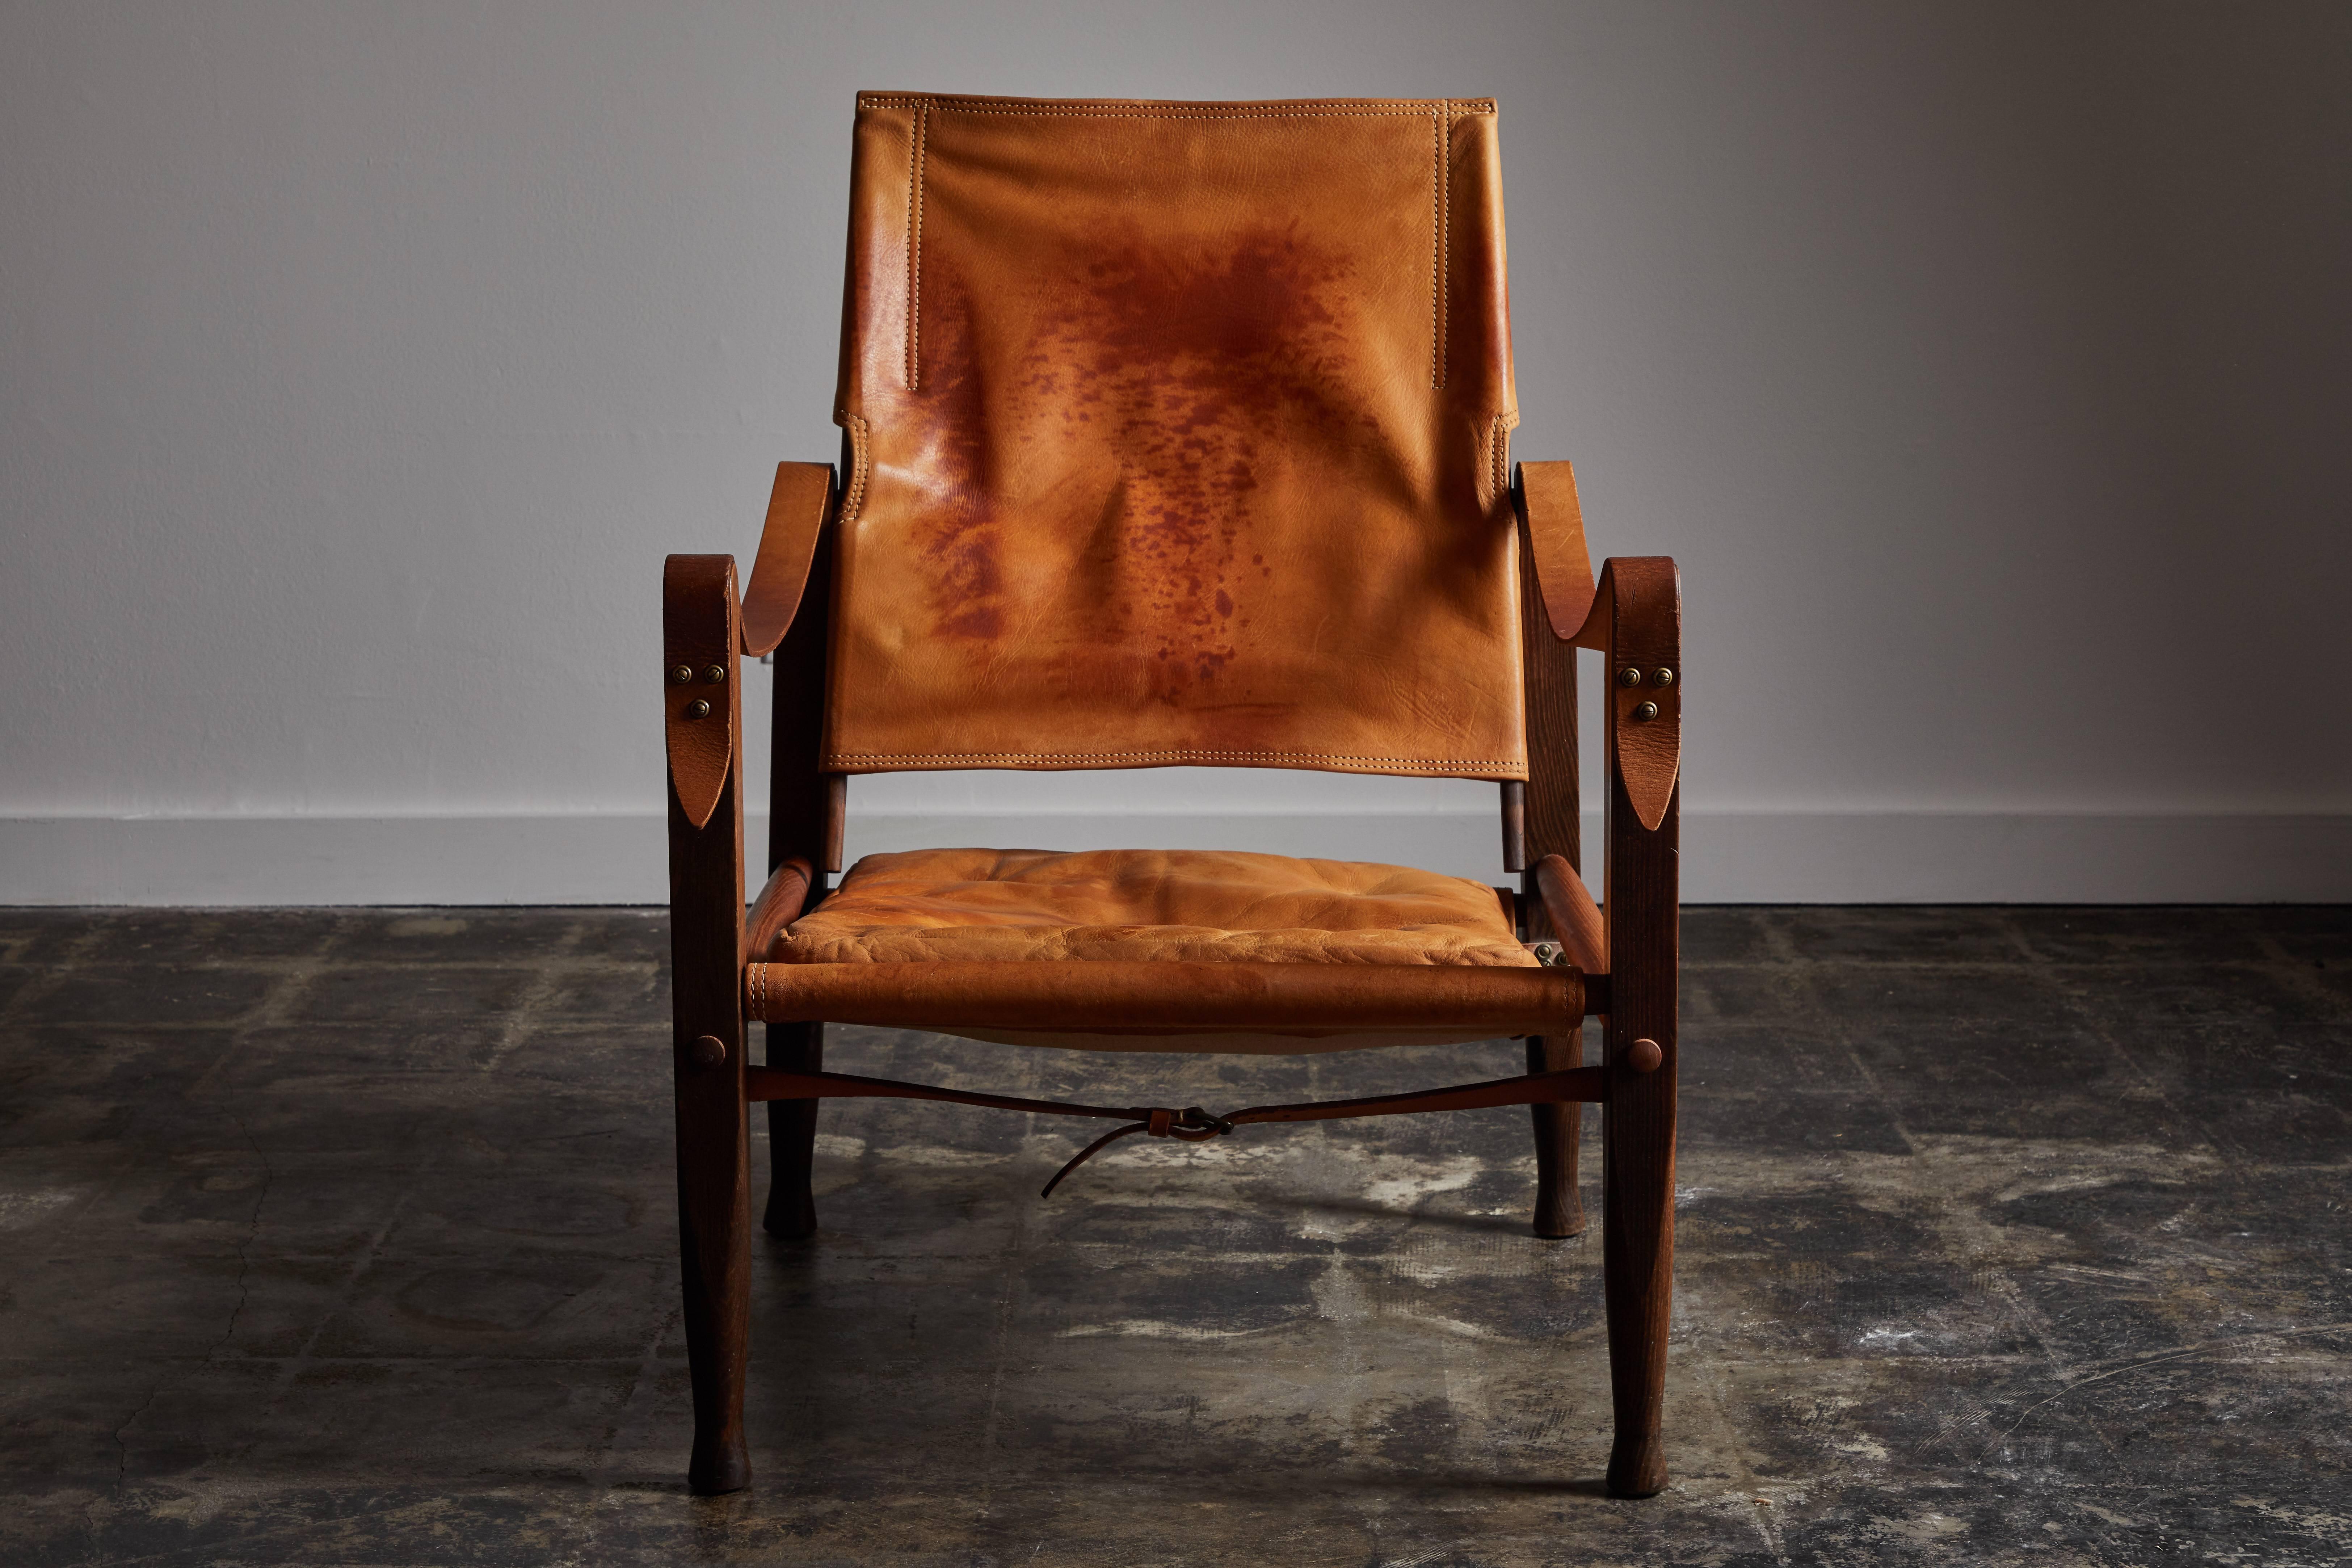 Kaare Klint Safari Chair for Rud Rasmussen with original patinated leather and wood legs. Made in Denmark, circa 1950s.

Available with original catalogues and correspondence from original owner.